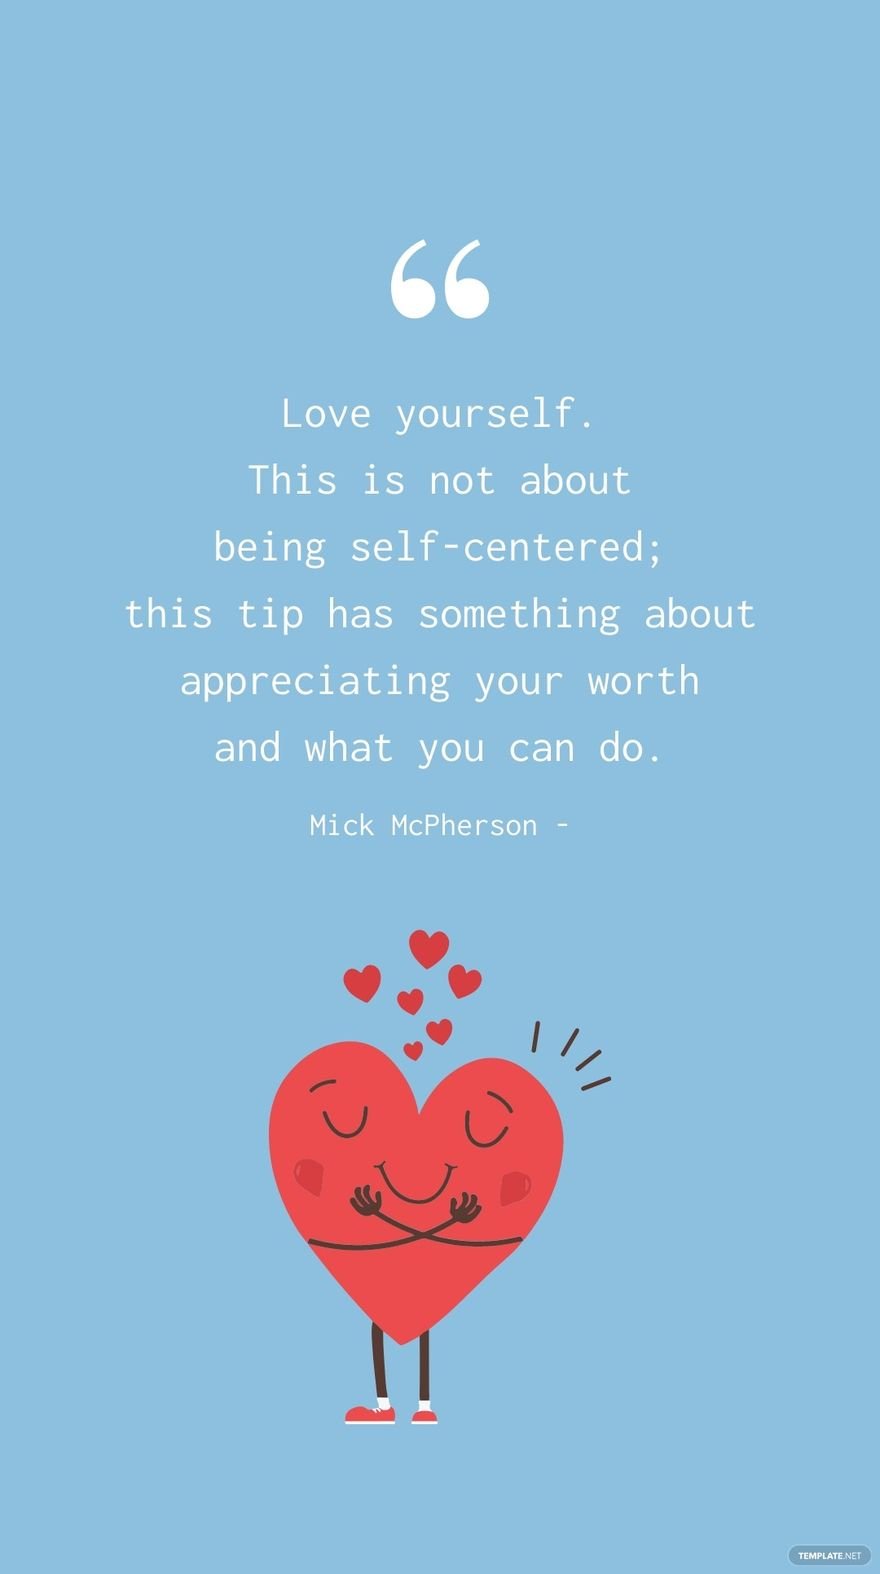 Mick McPherson - Love yourself. This is not about being self-centered; this tip has something about appreciating your worth and what you can do.